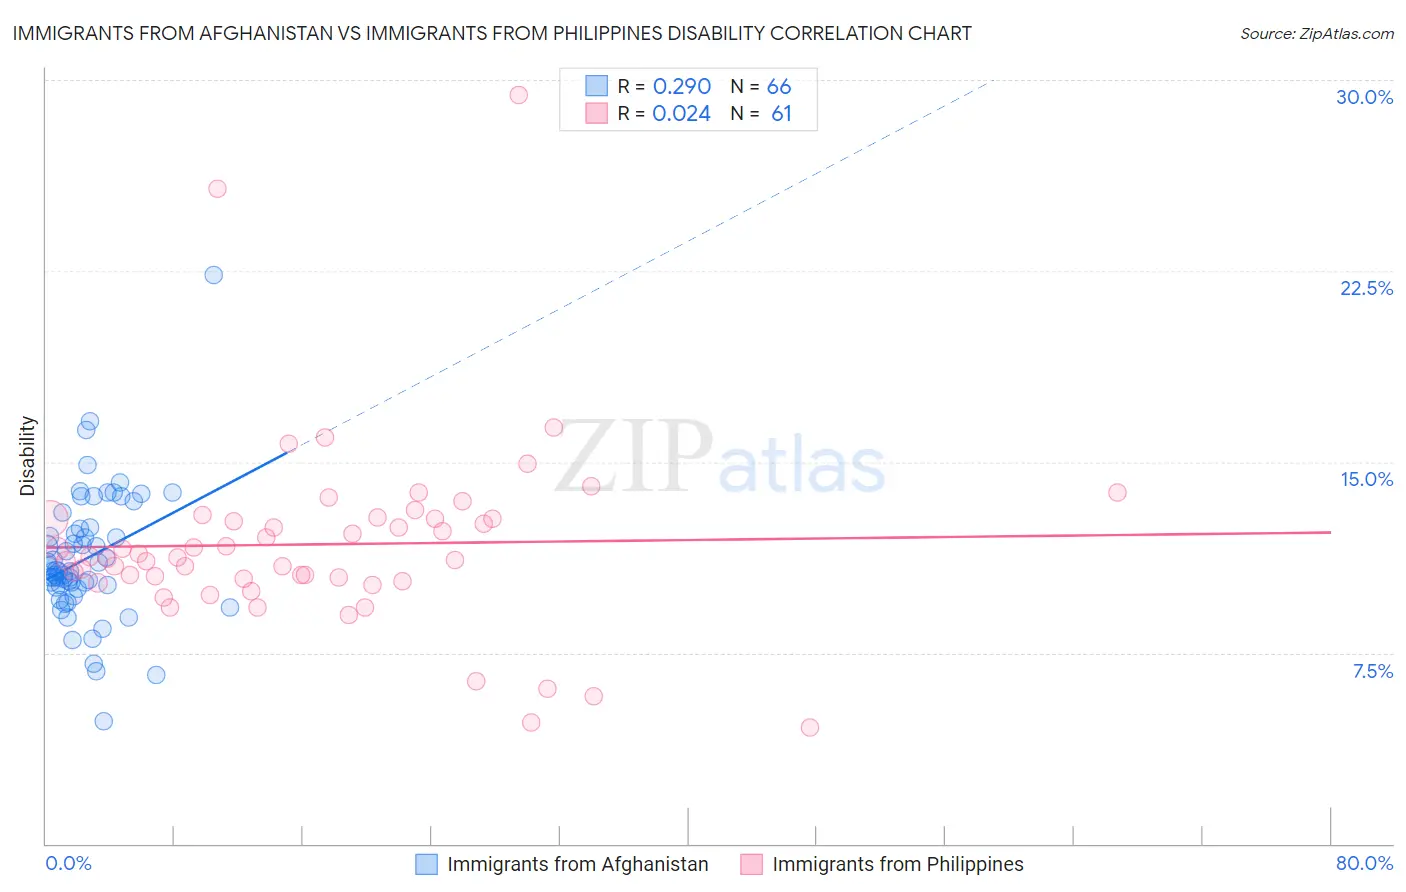 Immigrants from Afghanistan vs Immigrants from Philippines Disability